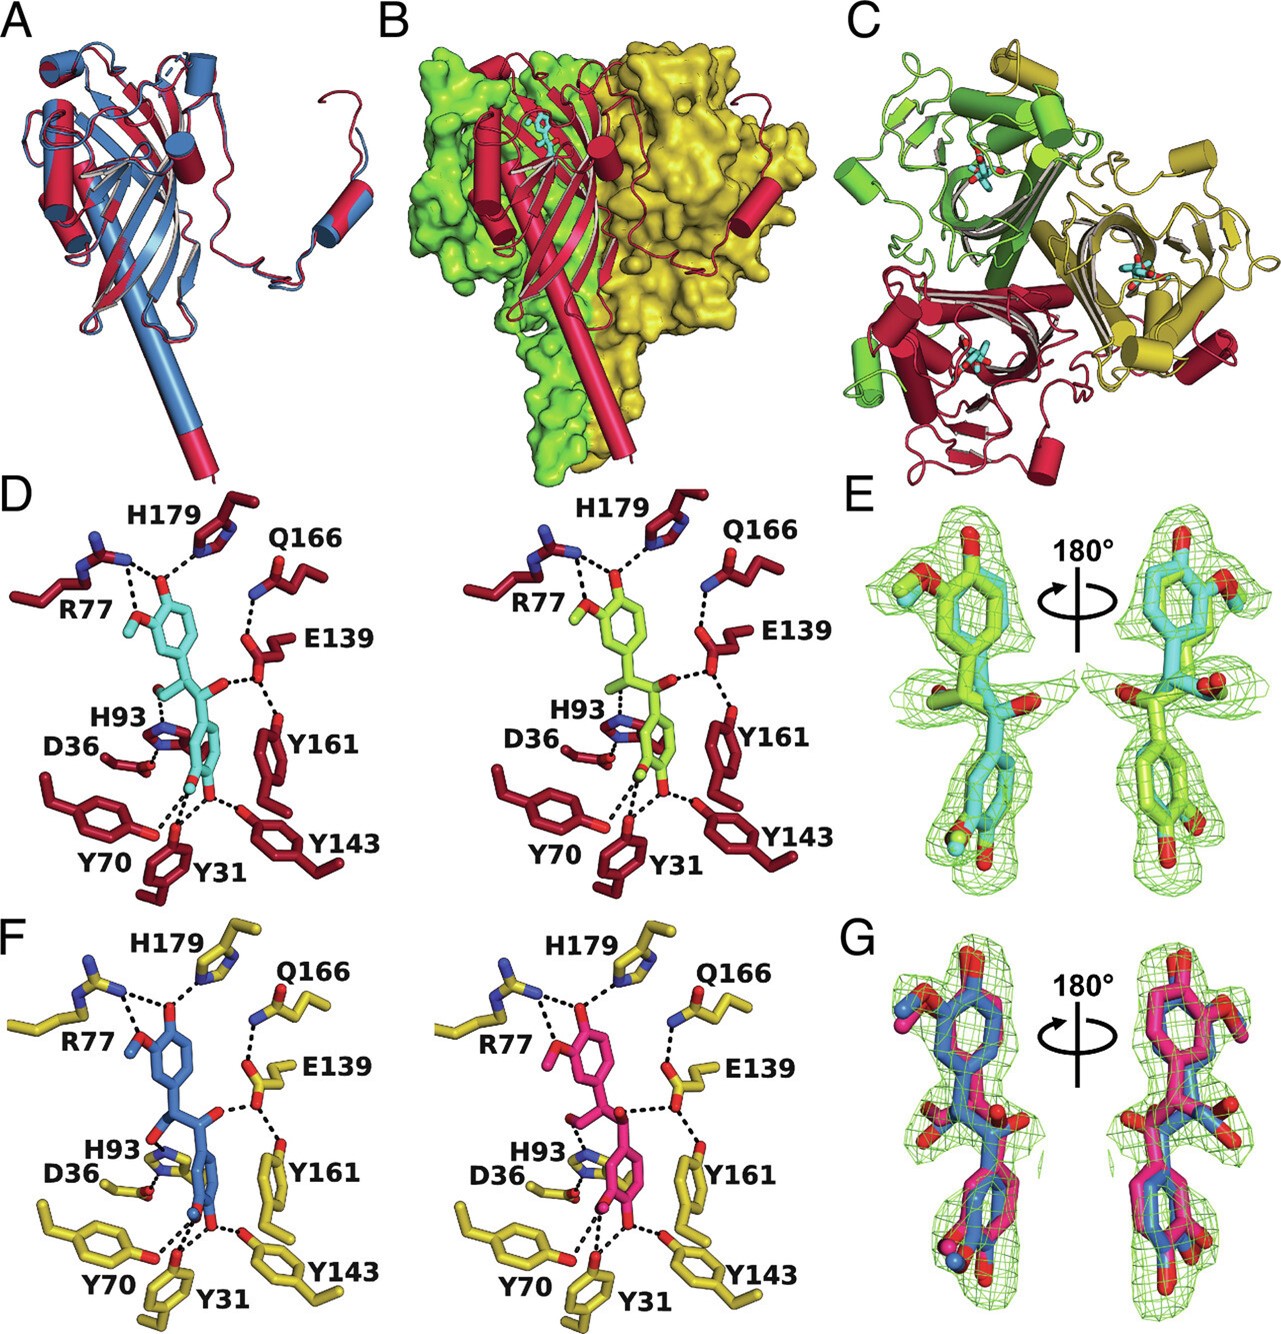 Structural architecture of LdpA and substrate interactions. (A) Superposition of SpLdpA (magenta) with NaLdpA (teal). (B) Side view of the SpLdpA trimer. Two protein chains are shown as surfaces (yellow and green) and one protein chain is shown in cartoon mode (red) with bound substrate erythro-DGPD (light blue). (C) Top view of the SpLdpA trimer. (D) Pseudo-stereoscopic view of the interaction of SpLdpA with the erythro-DGPD enantiomers (αS, βR) (Left) and (αR, βS) (Right). When viewed in stereo, alternating eye switching results in an optimal impression of the binding modes of the two diastereomer substrates. (E) Omit electron density map for the (αS, βR)- and (αR, βS)-erythro-DGPD enantiomers bound to SpLdpA at 2.5 σ level. (F) Pseudo-stereoscopic view of the interaction of SpLdpA with the threo-DGPD enantiomers (αS, βS) (Left) and (αR, βR) (Right). (G) Omit electron density map for the (αS, βS)- and (αR, βR)-threo-DGPD enantiomers bound to SpLdpA at 2.5 σ level.